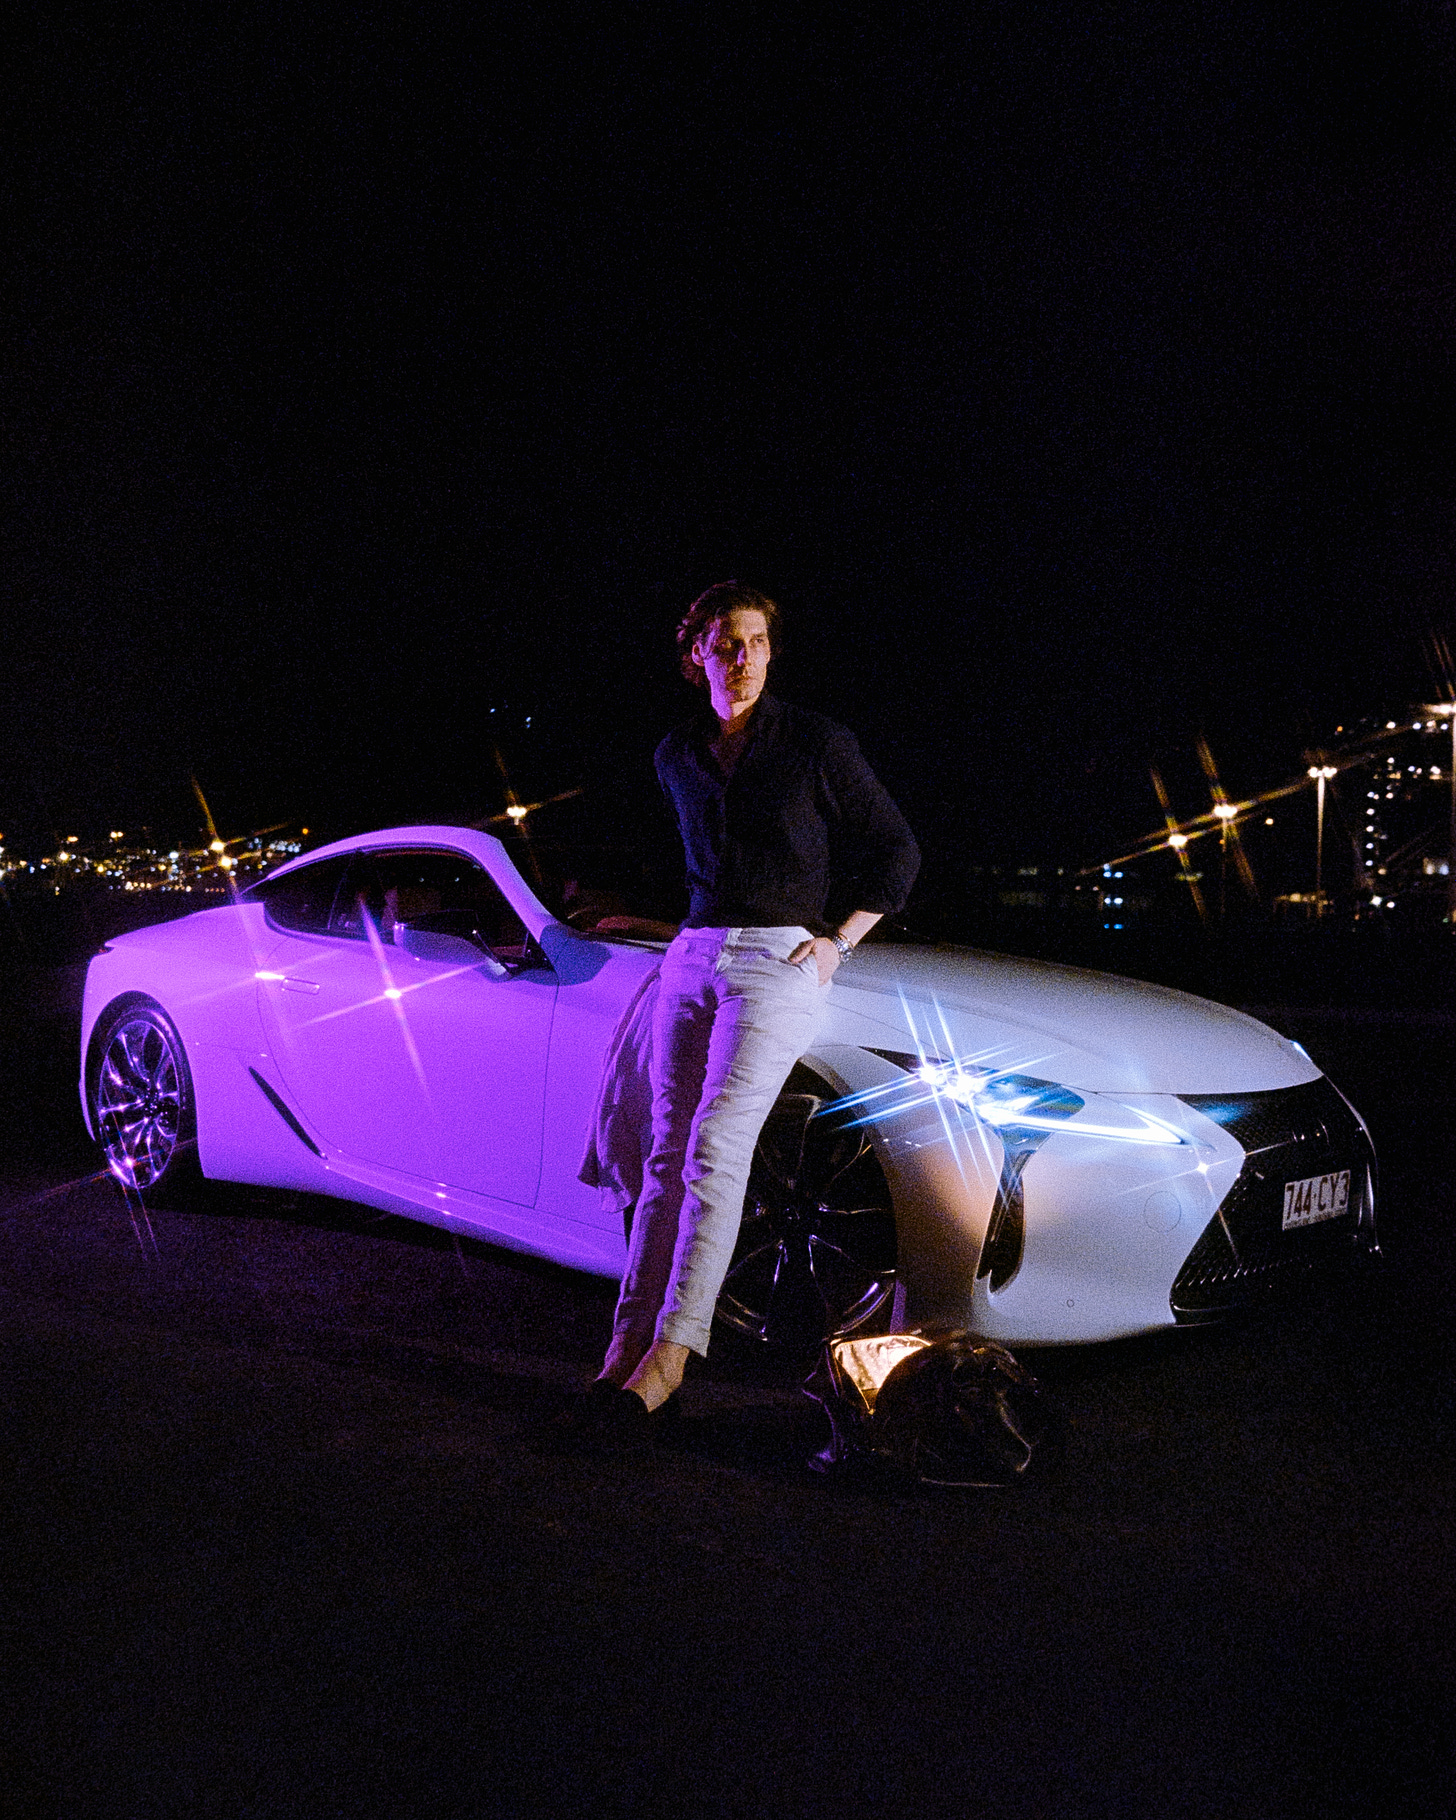 A wide angle shot of Clem and his Car, complete with purple light, lots of starbursts and the glowing duffle bag at his feet